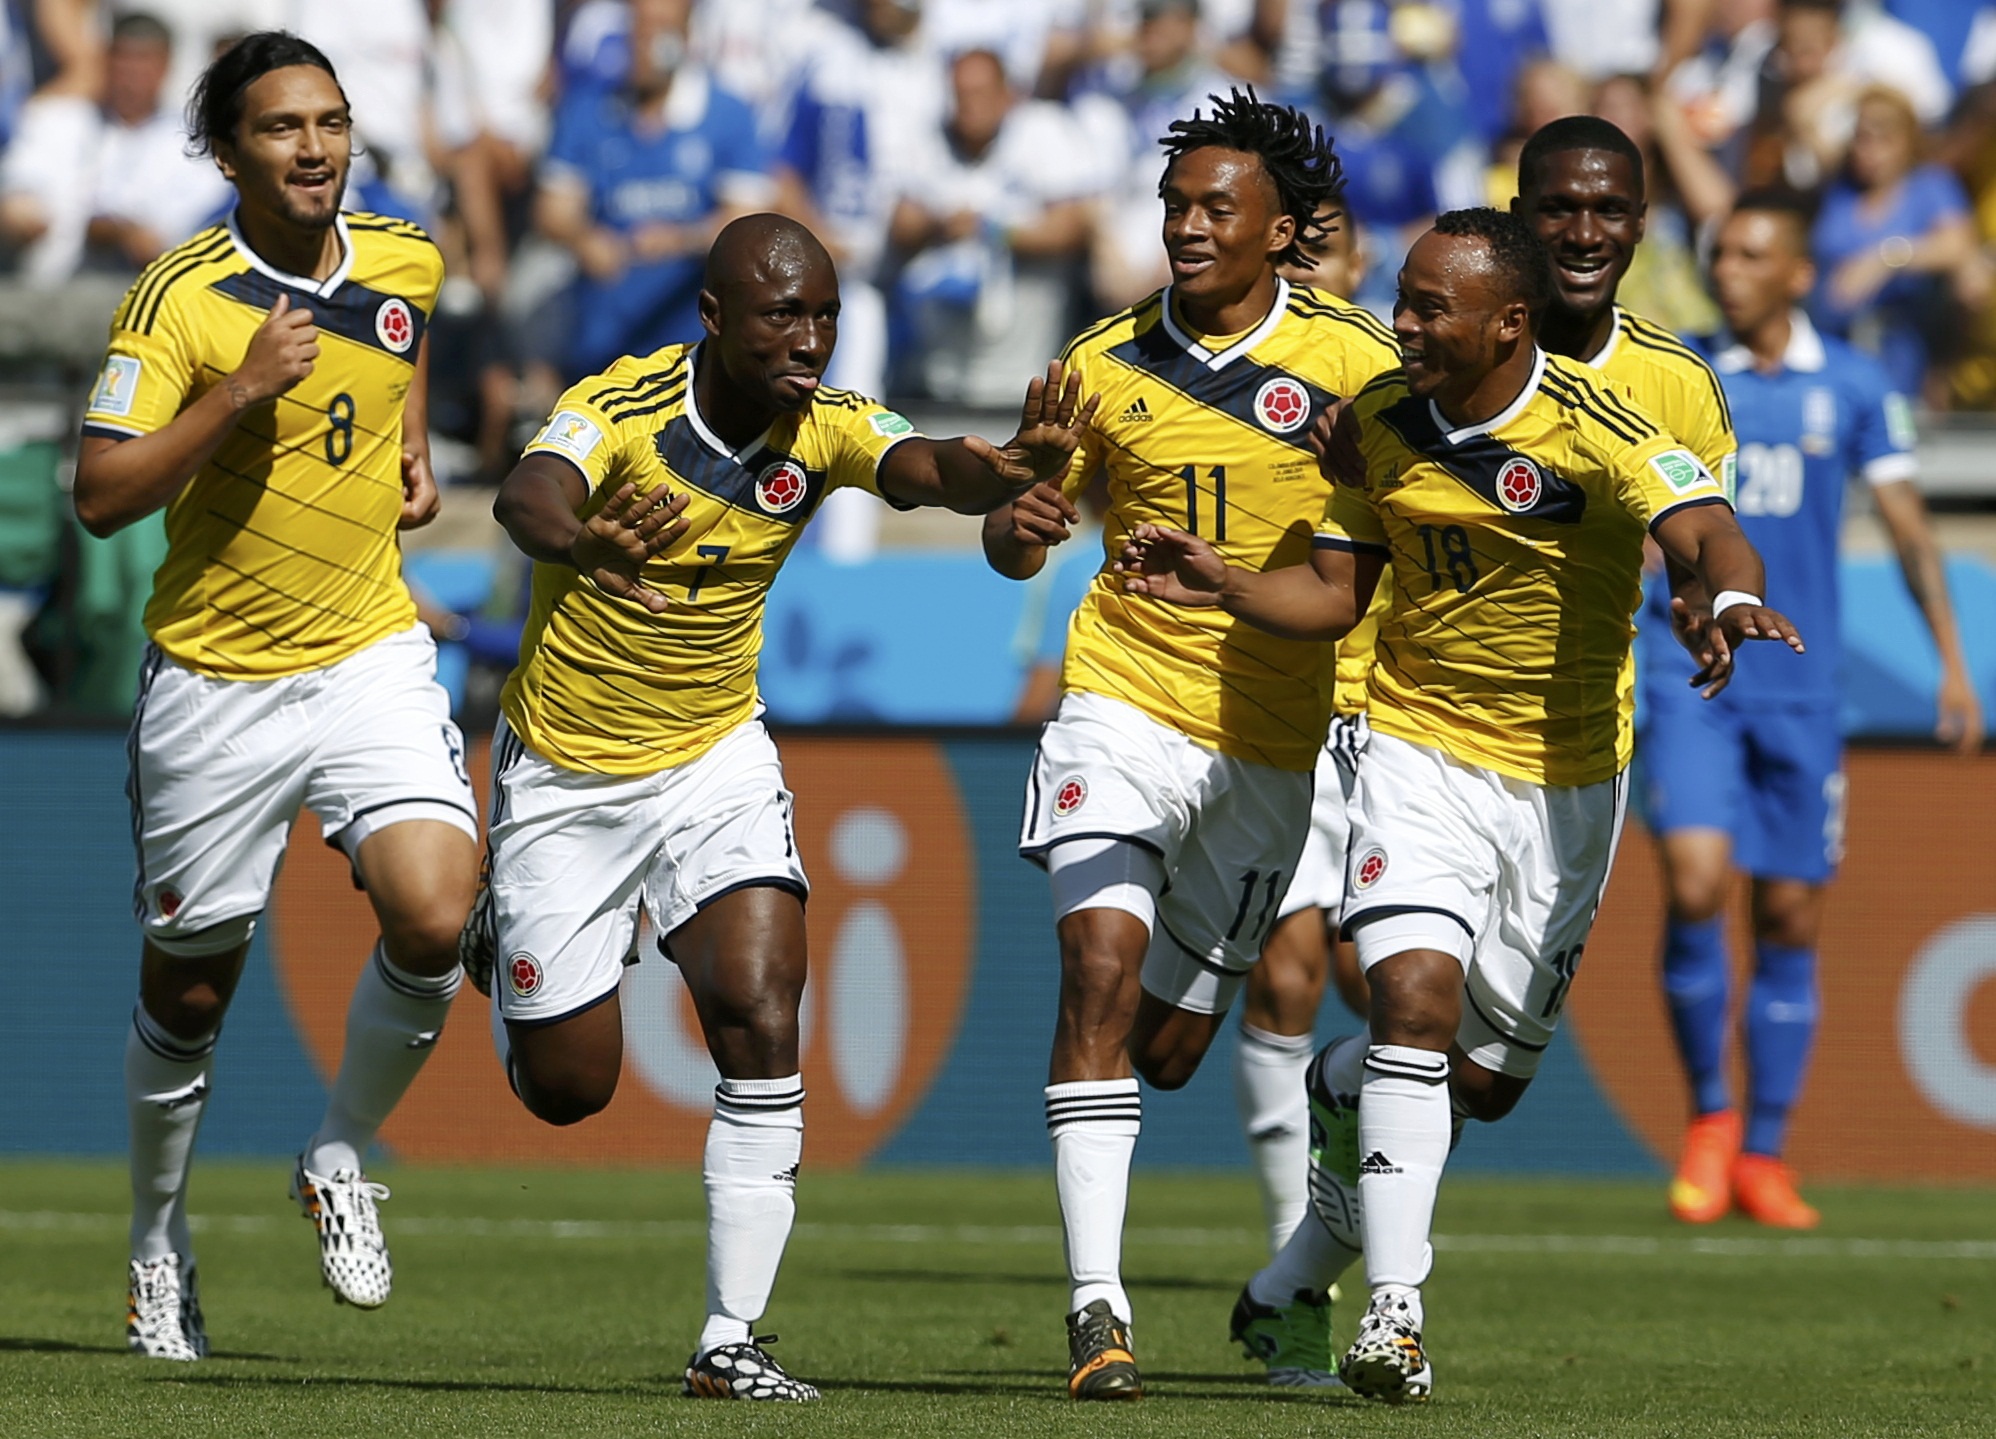 Colombia’s dance party is the best goal celebration of the World Cup